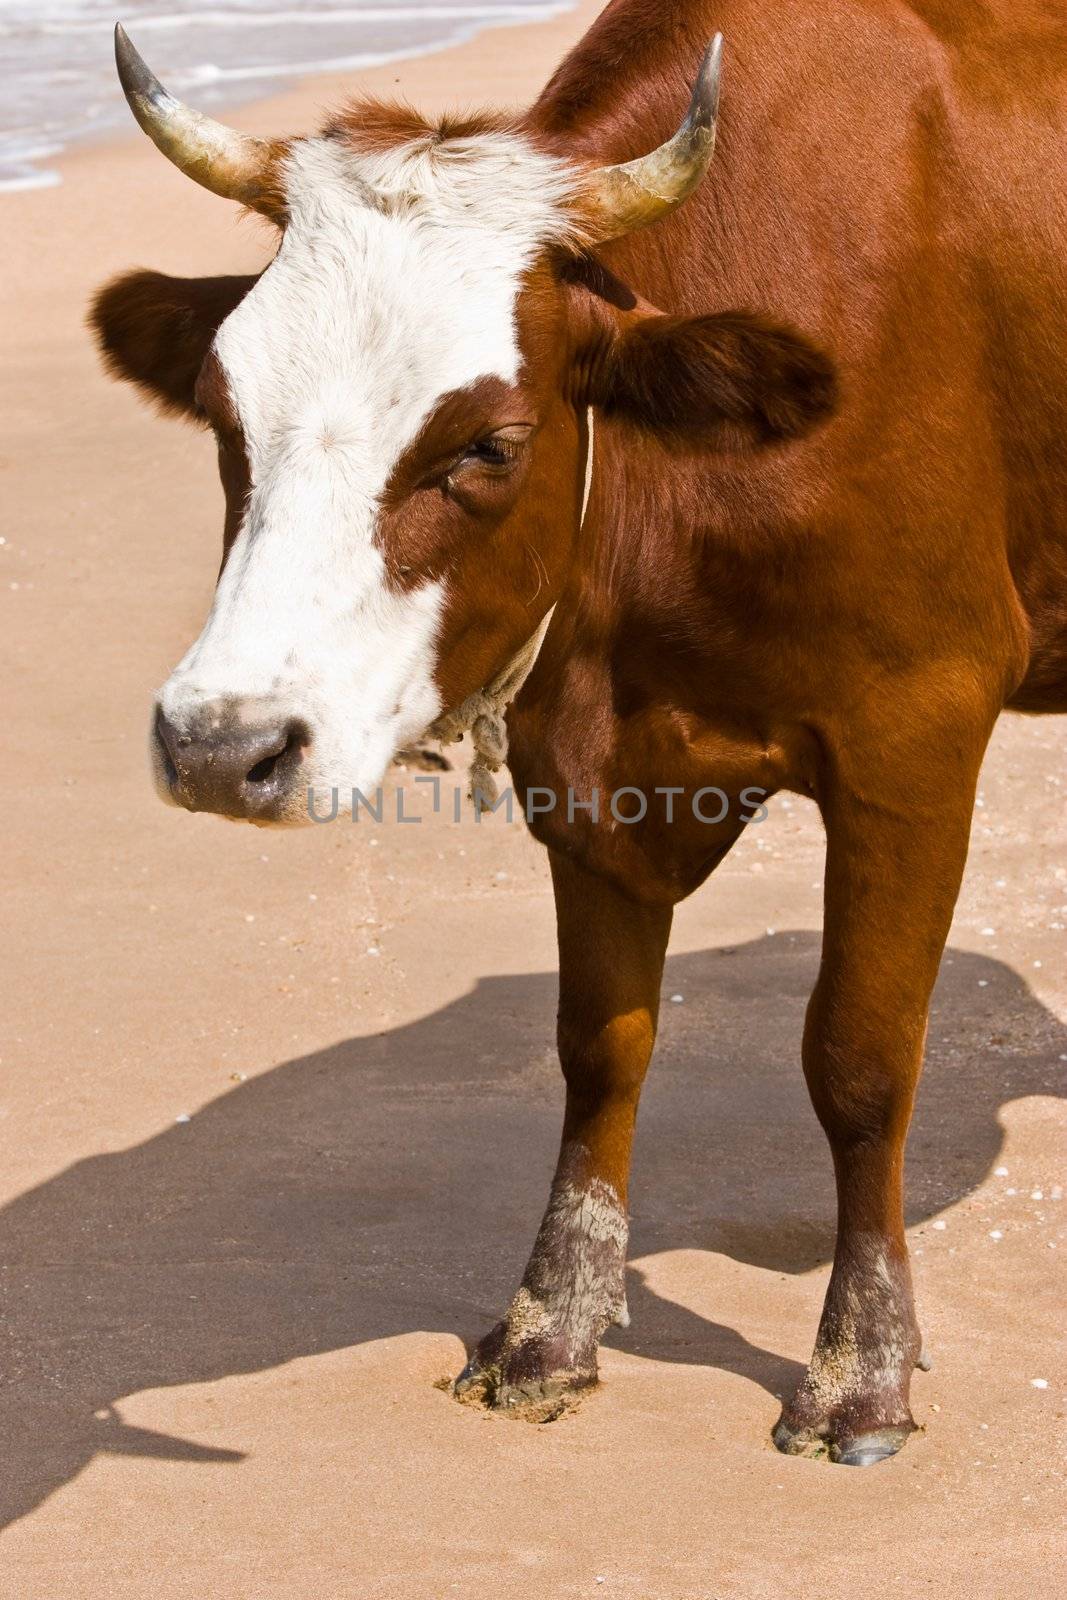 A red and white milk cow on the beach